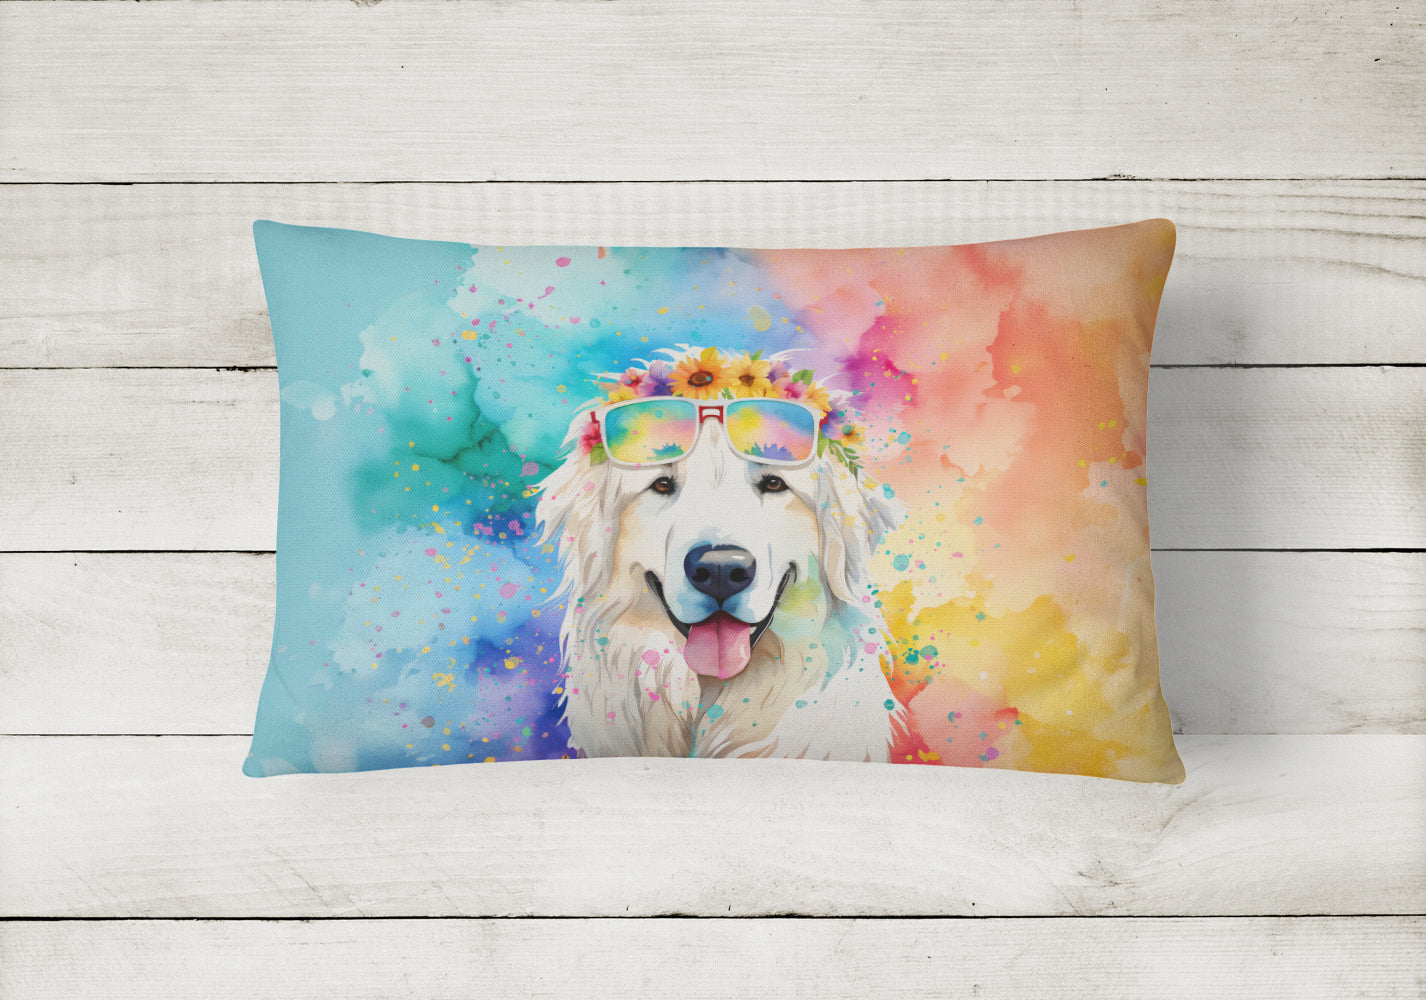 Buy this Great Pyrenees Hippie Dawg Fabric Decorative Pillow